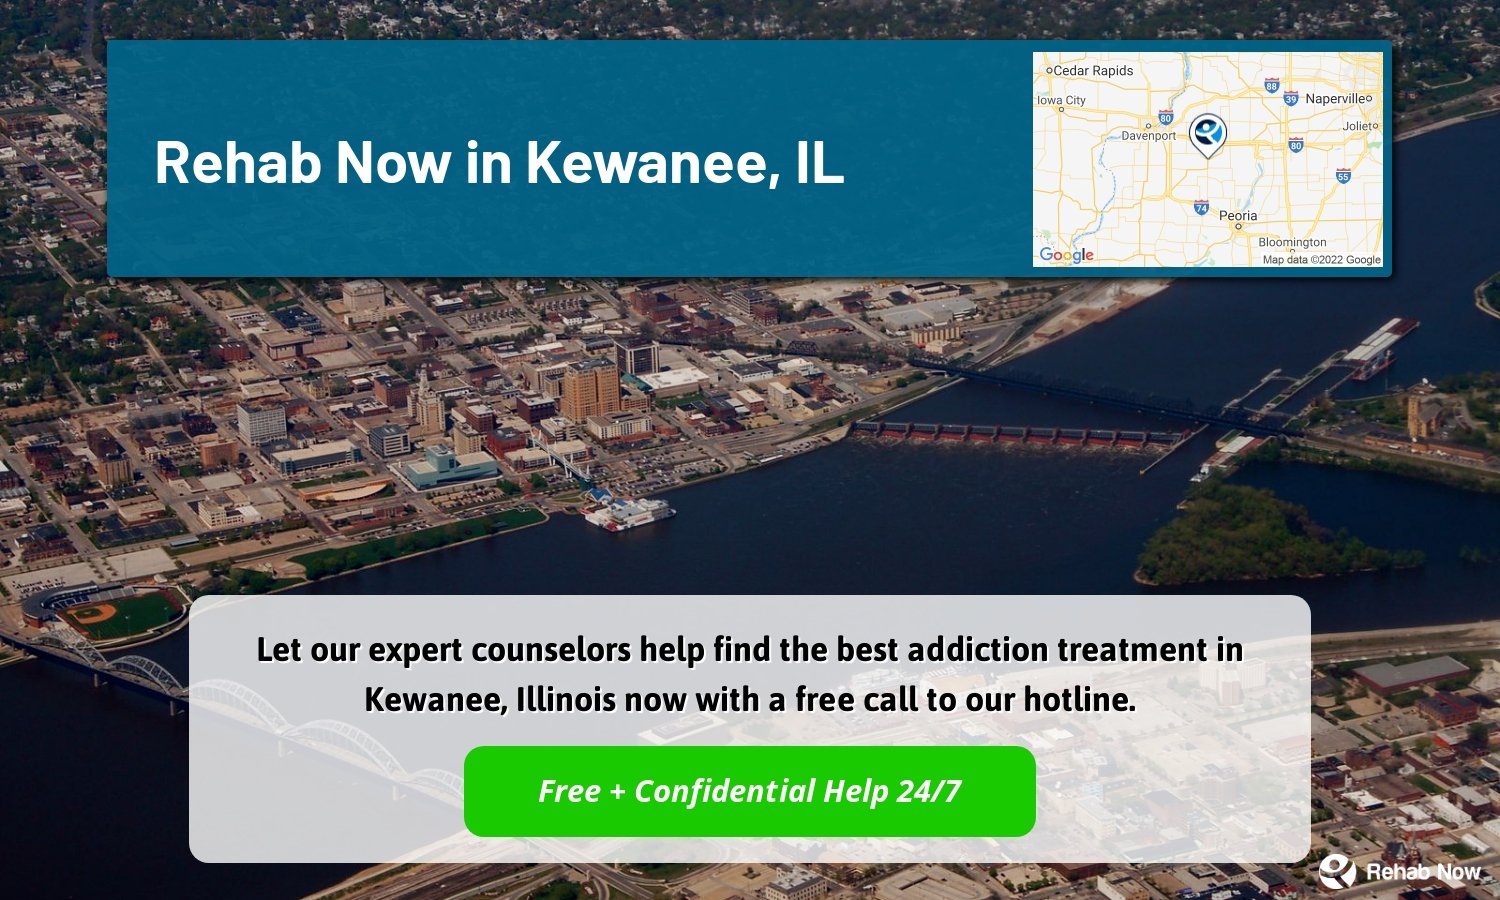 Let our expert counselors help find the best addiction treatment in Kewanee, Illinois now with a free call to our hotline.